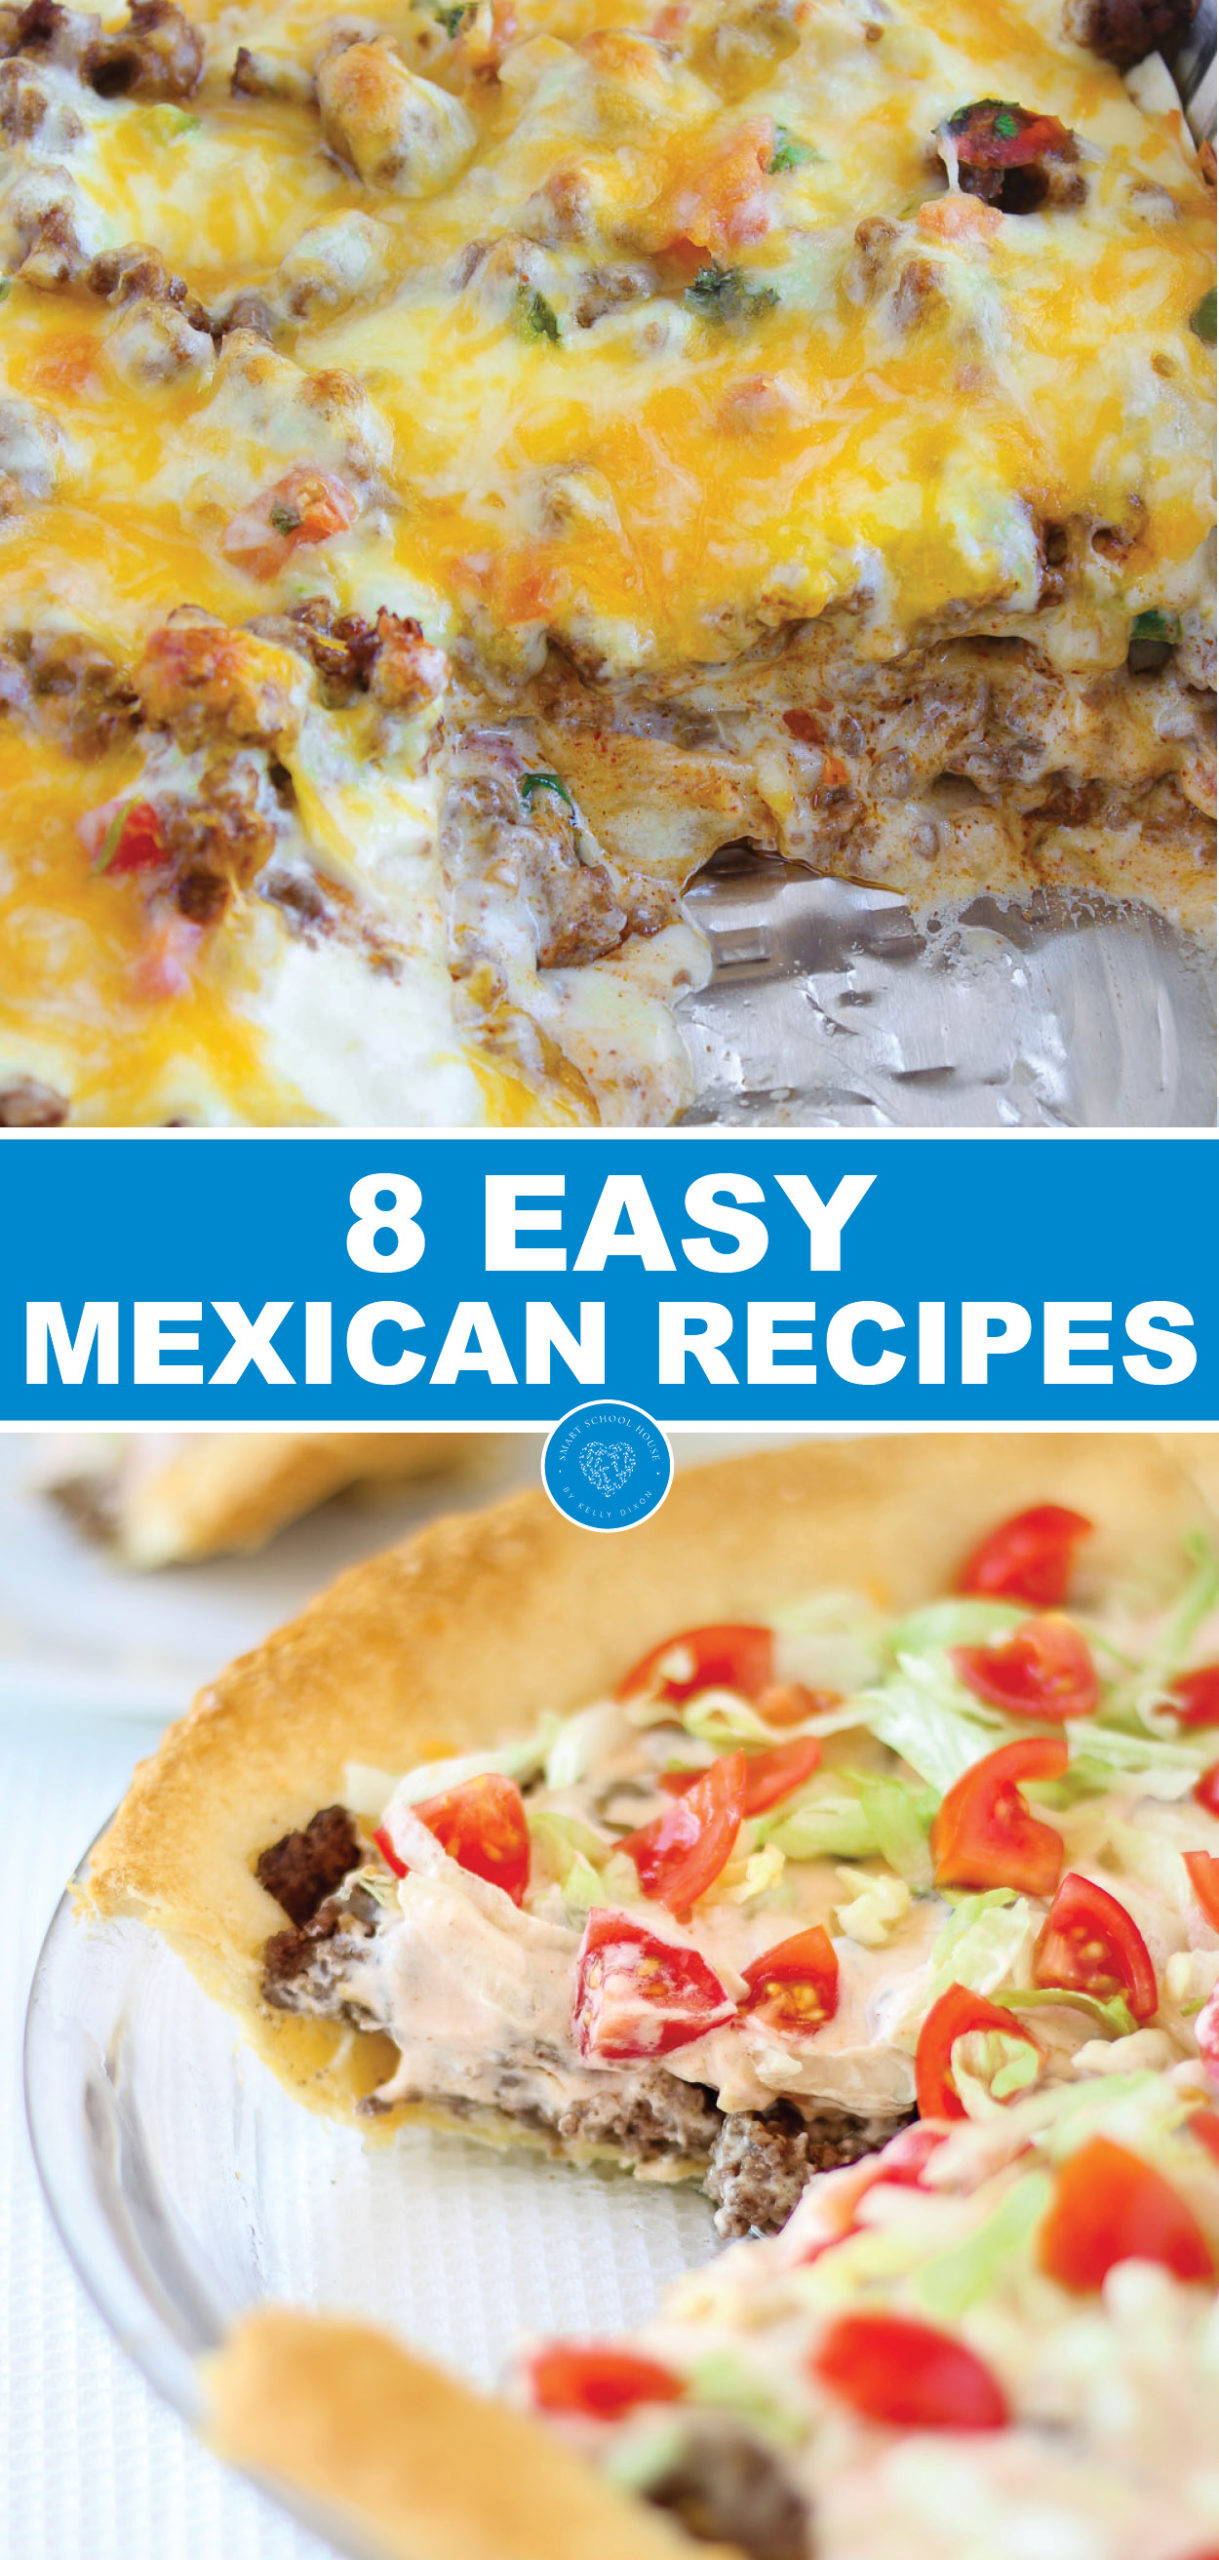 8 Easy Mexican recipes - The ingredients are EASY to find, the ingredients are simple to work with, and each recipe is DELICIOUS! For all of the parents pretending to be teachers out there, grab a margarita, look forward to one of these Easy Mexican Recipes